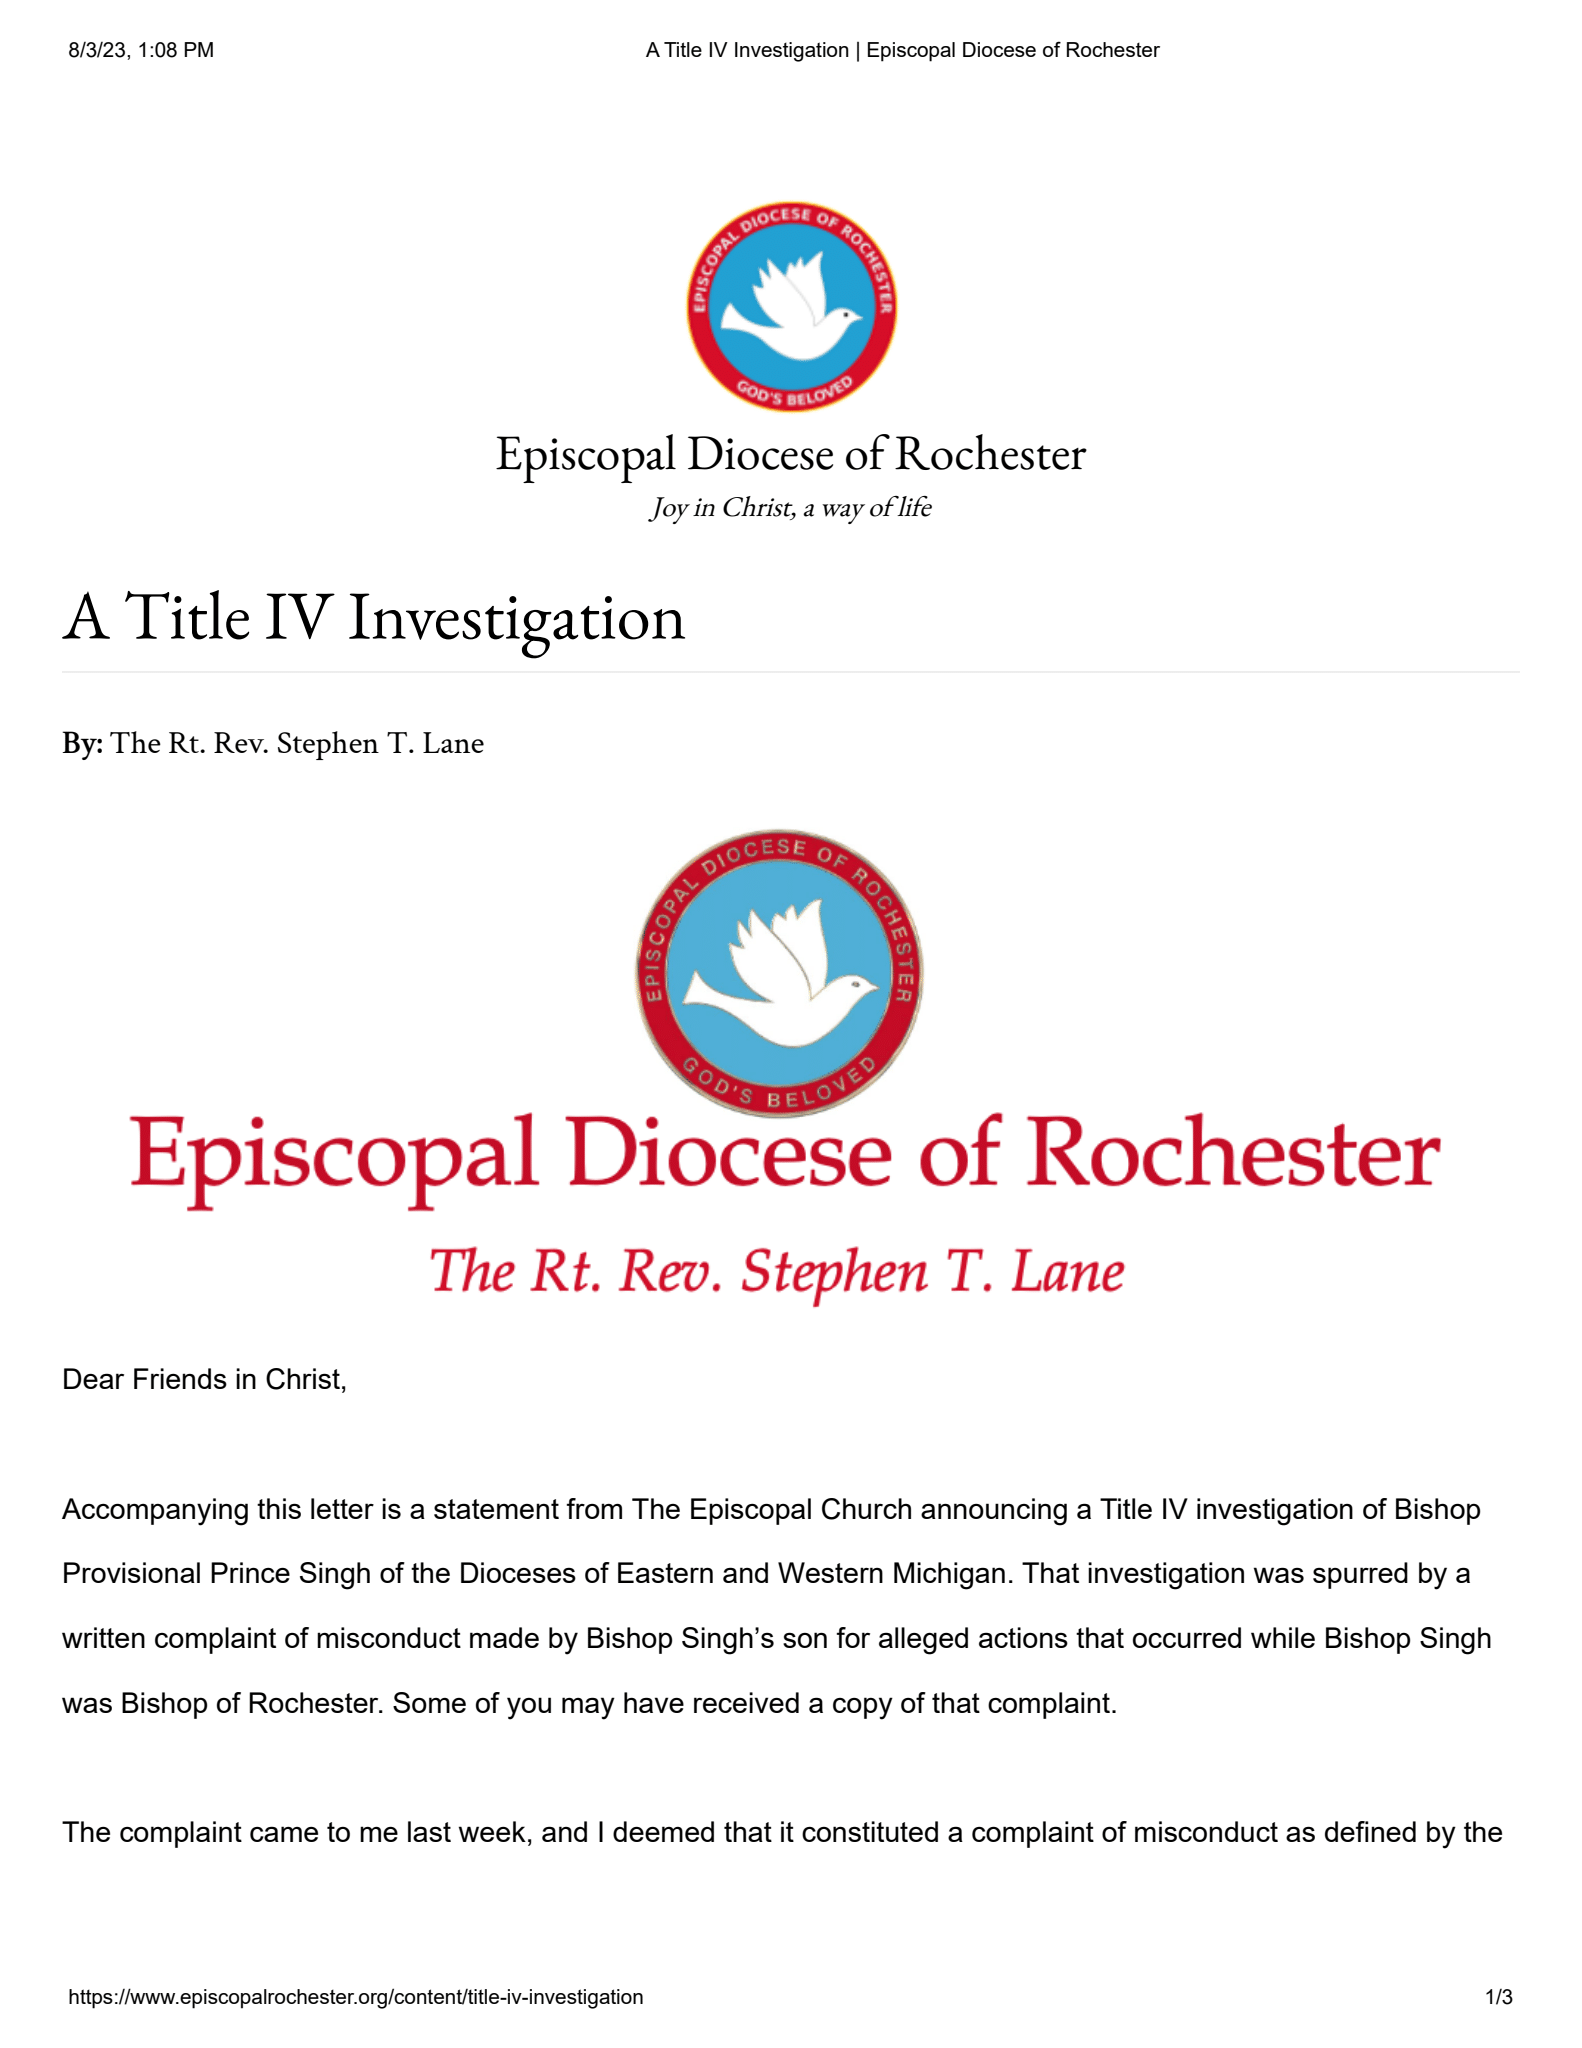 Bishop Lane's announcement to Episcopal Diocese of Rochester - Page 1